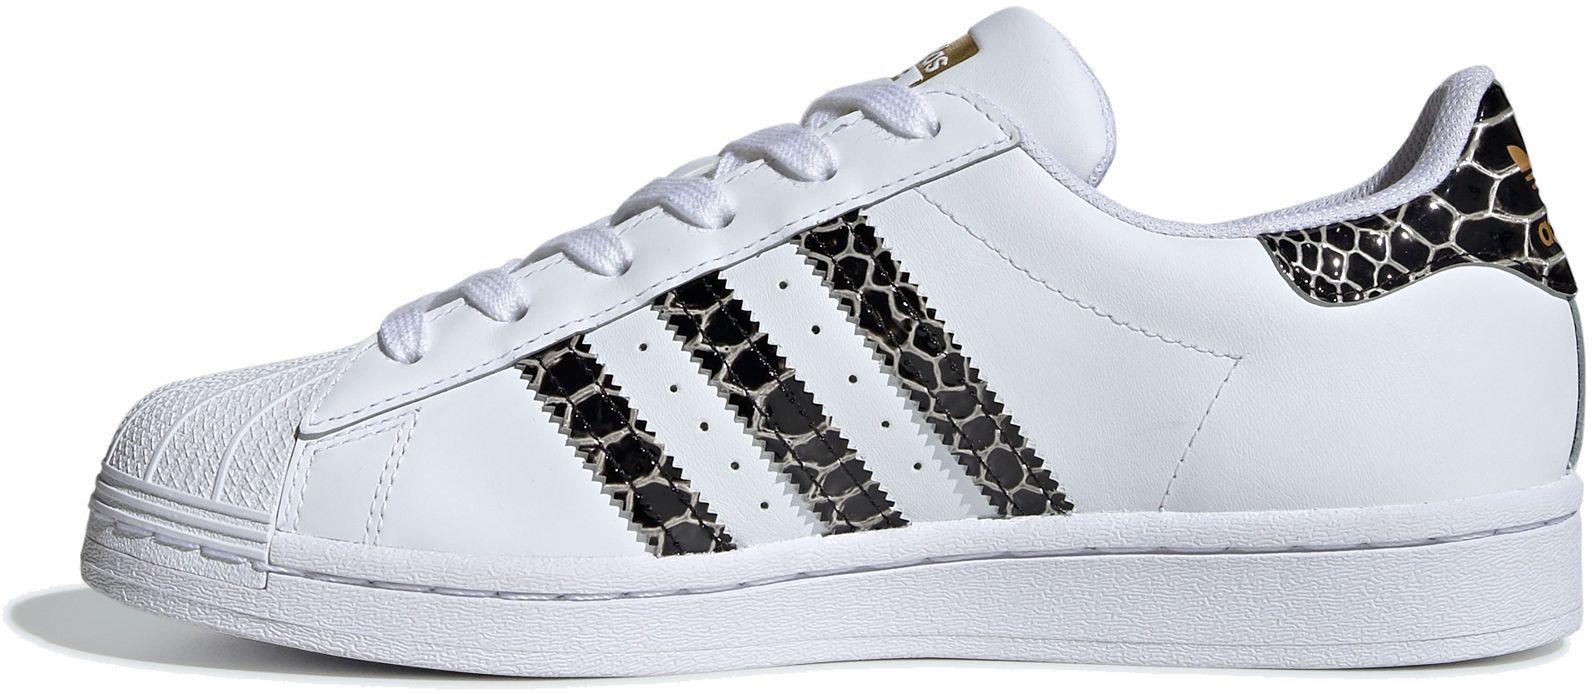 adidas Leather Superstar Print Shoes in White/Print (White) - Lyst